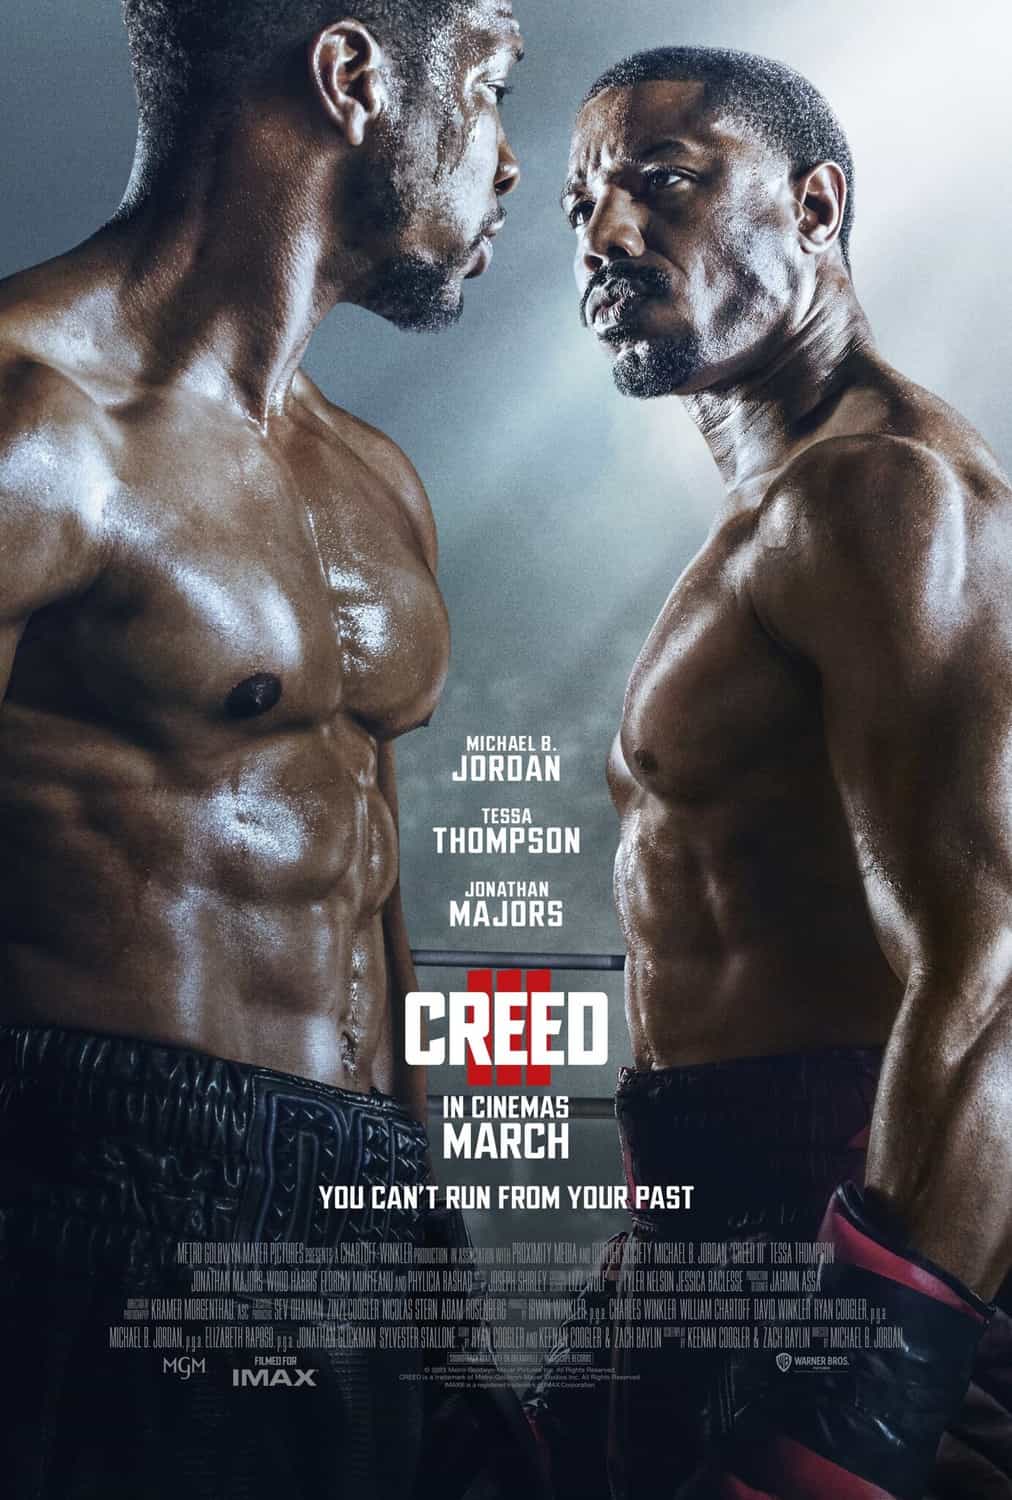 First trailer and poster for Creed III starring and directed by Michael B. Jordan - movie UK release date 3rd March 2023 #creediii